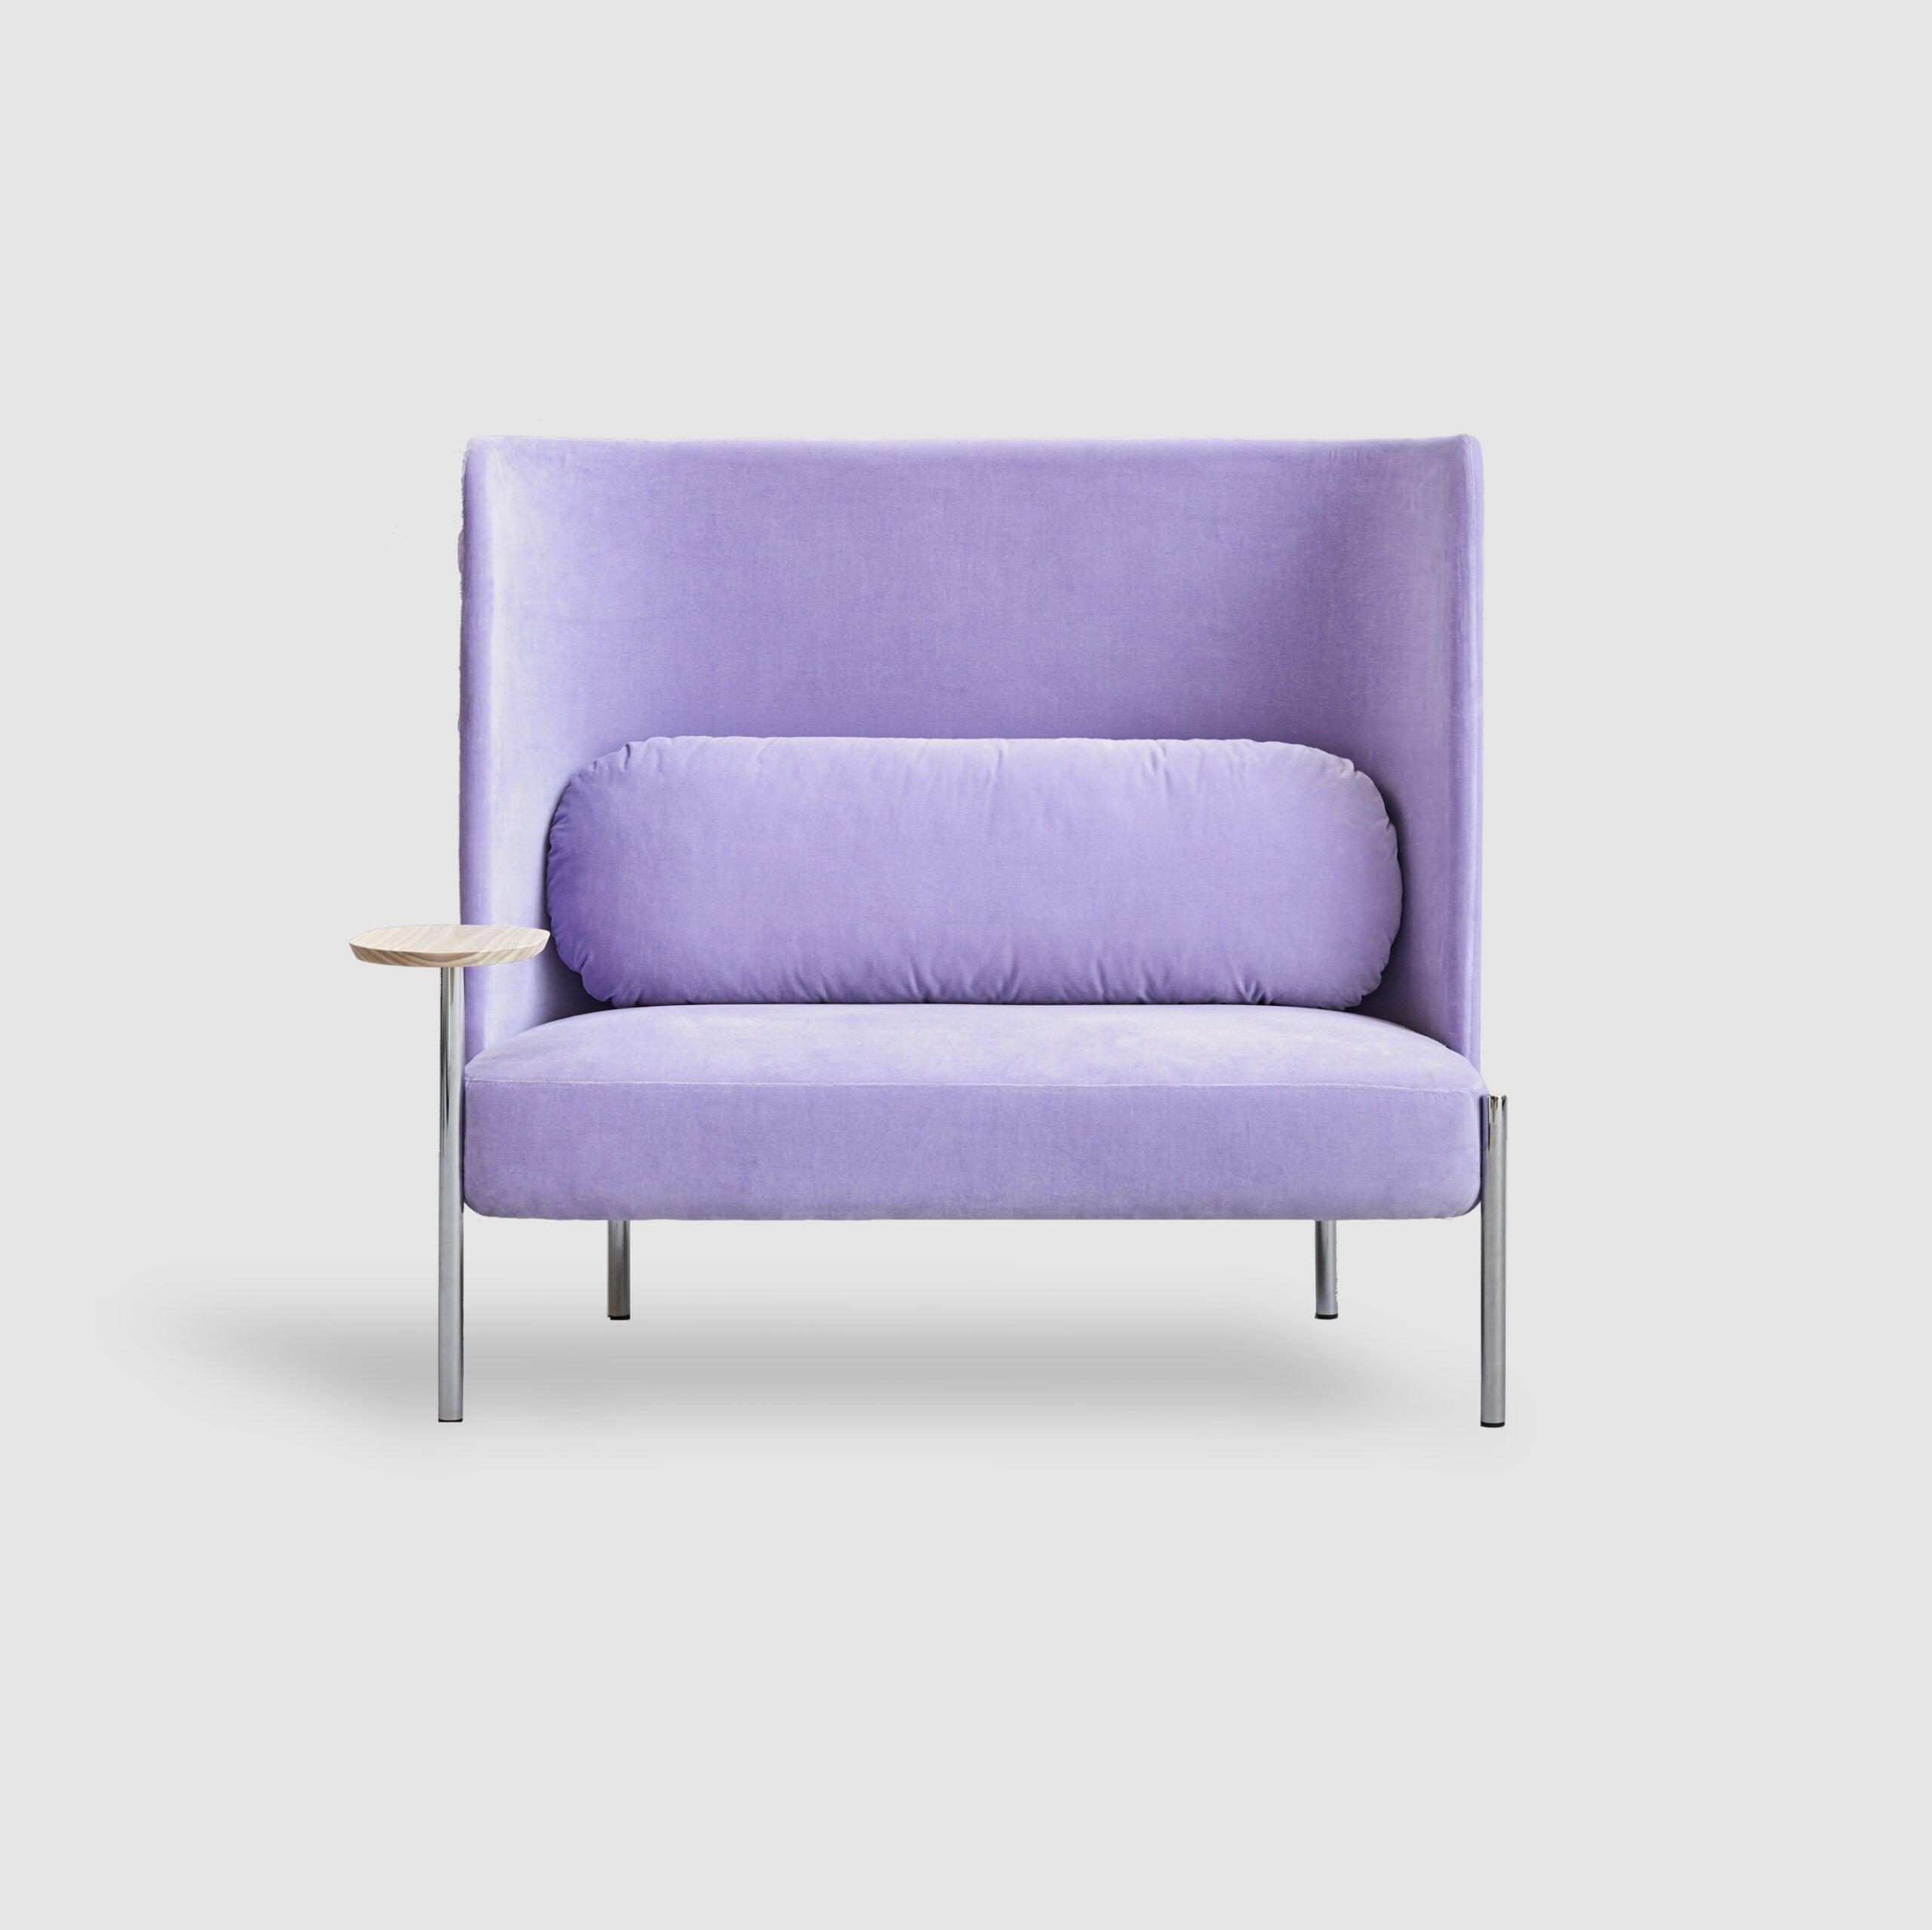 Ara sofa with side table by Pepe Albargues
Dimensions: W130, D75, H123, Seat45
Materials: Iron backrest structure and pine wood seat structure
Foam CMHR (high resilience and flame retardant) is used for the seats
Cushion 50% goose feathers and